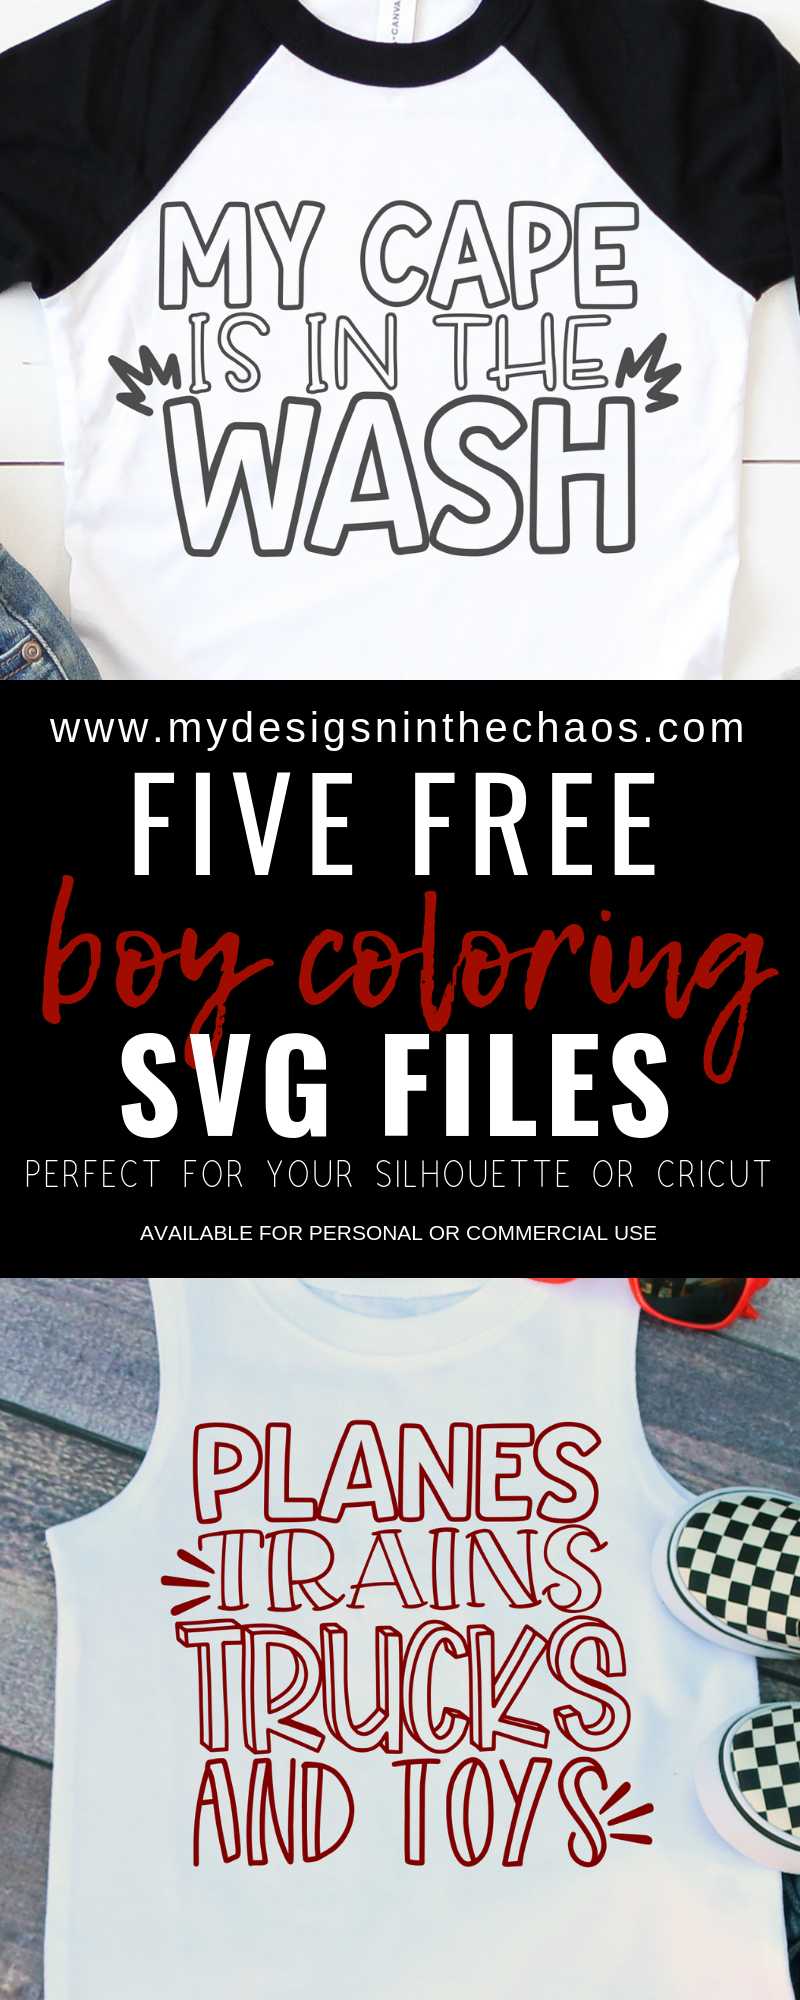 Download Free Boy Coloring Book SVG Files - My Designs In the Chaos